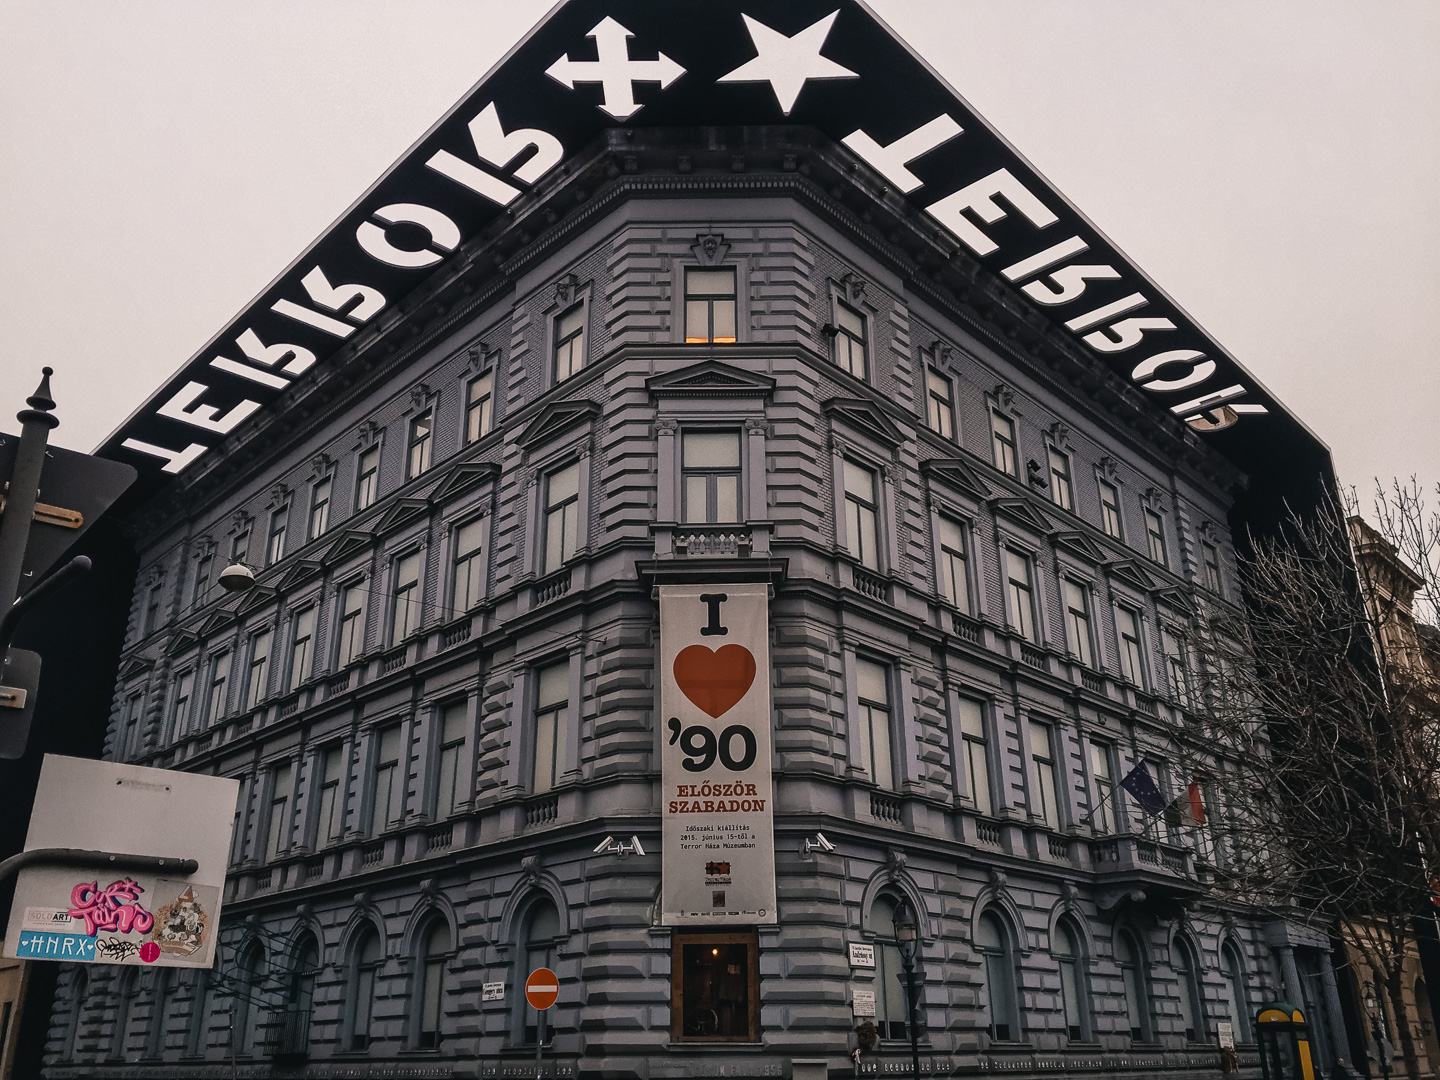 The House of Terror, located in a former secret police headquarters. A history museum in Budapest that gives a glimpse into Hungary's dark past. 